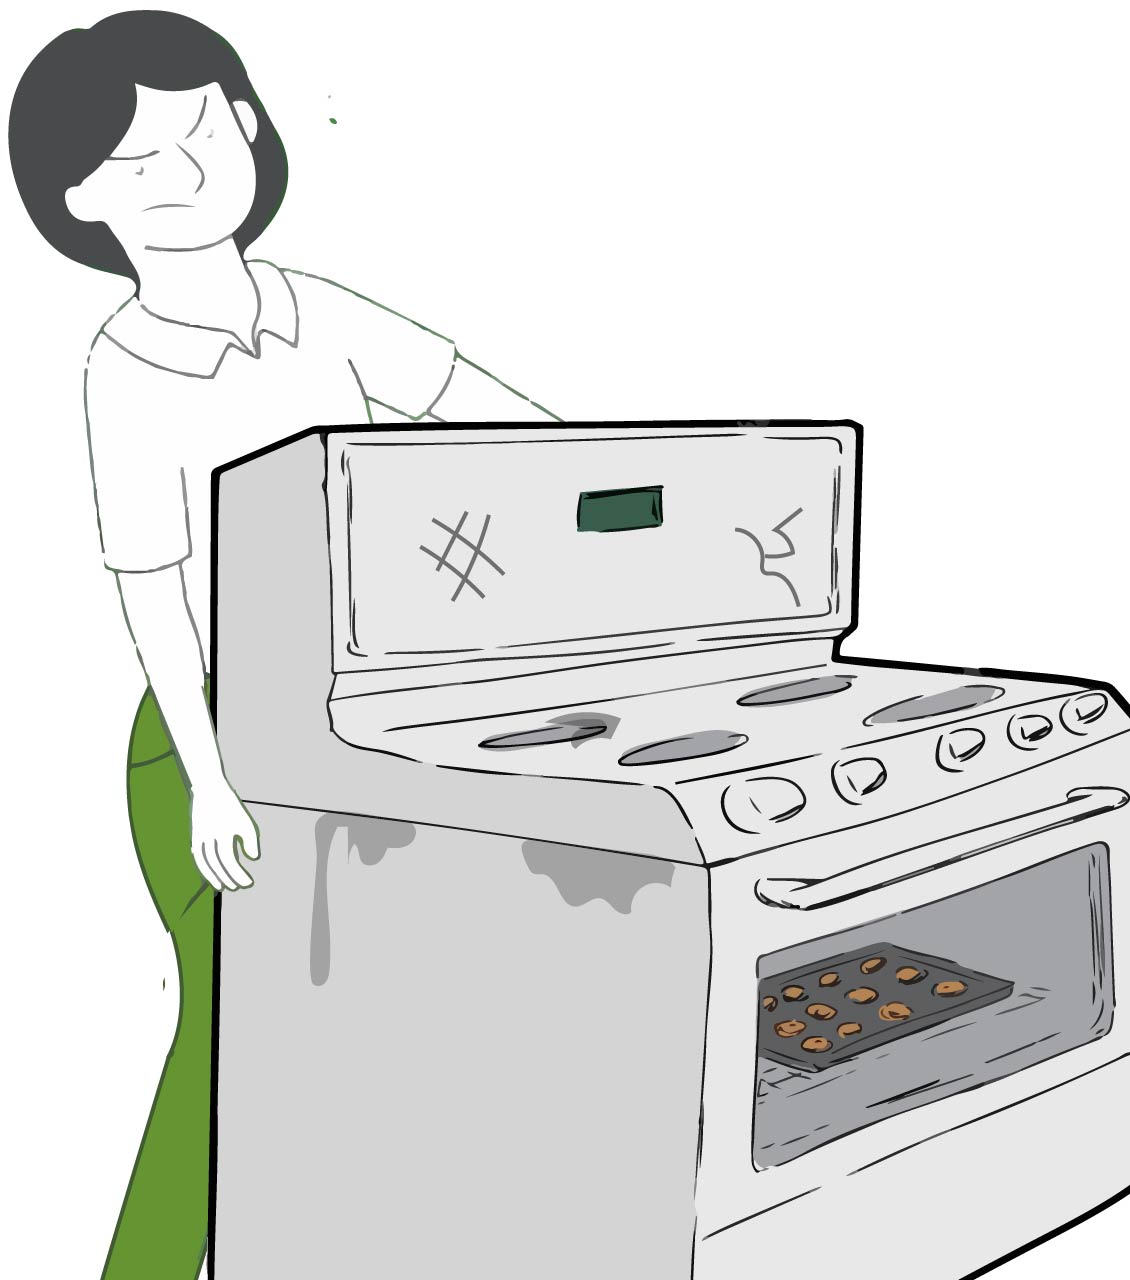 Baltimore oven removal services